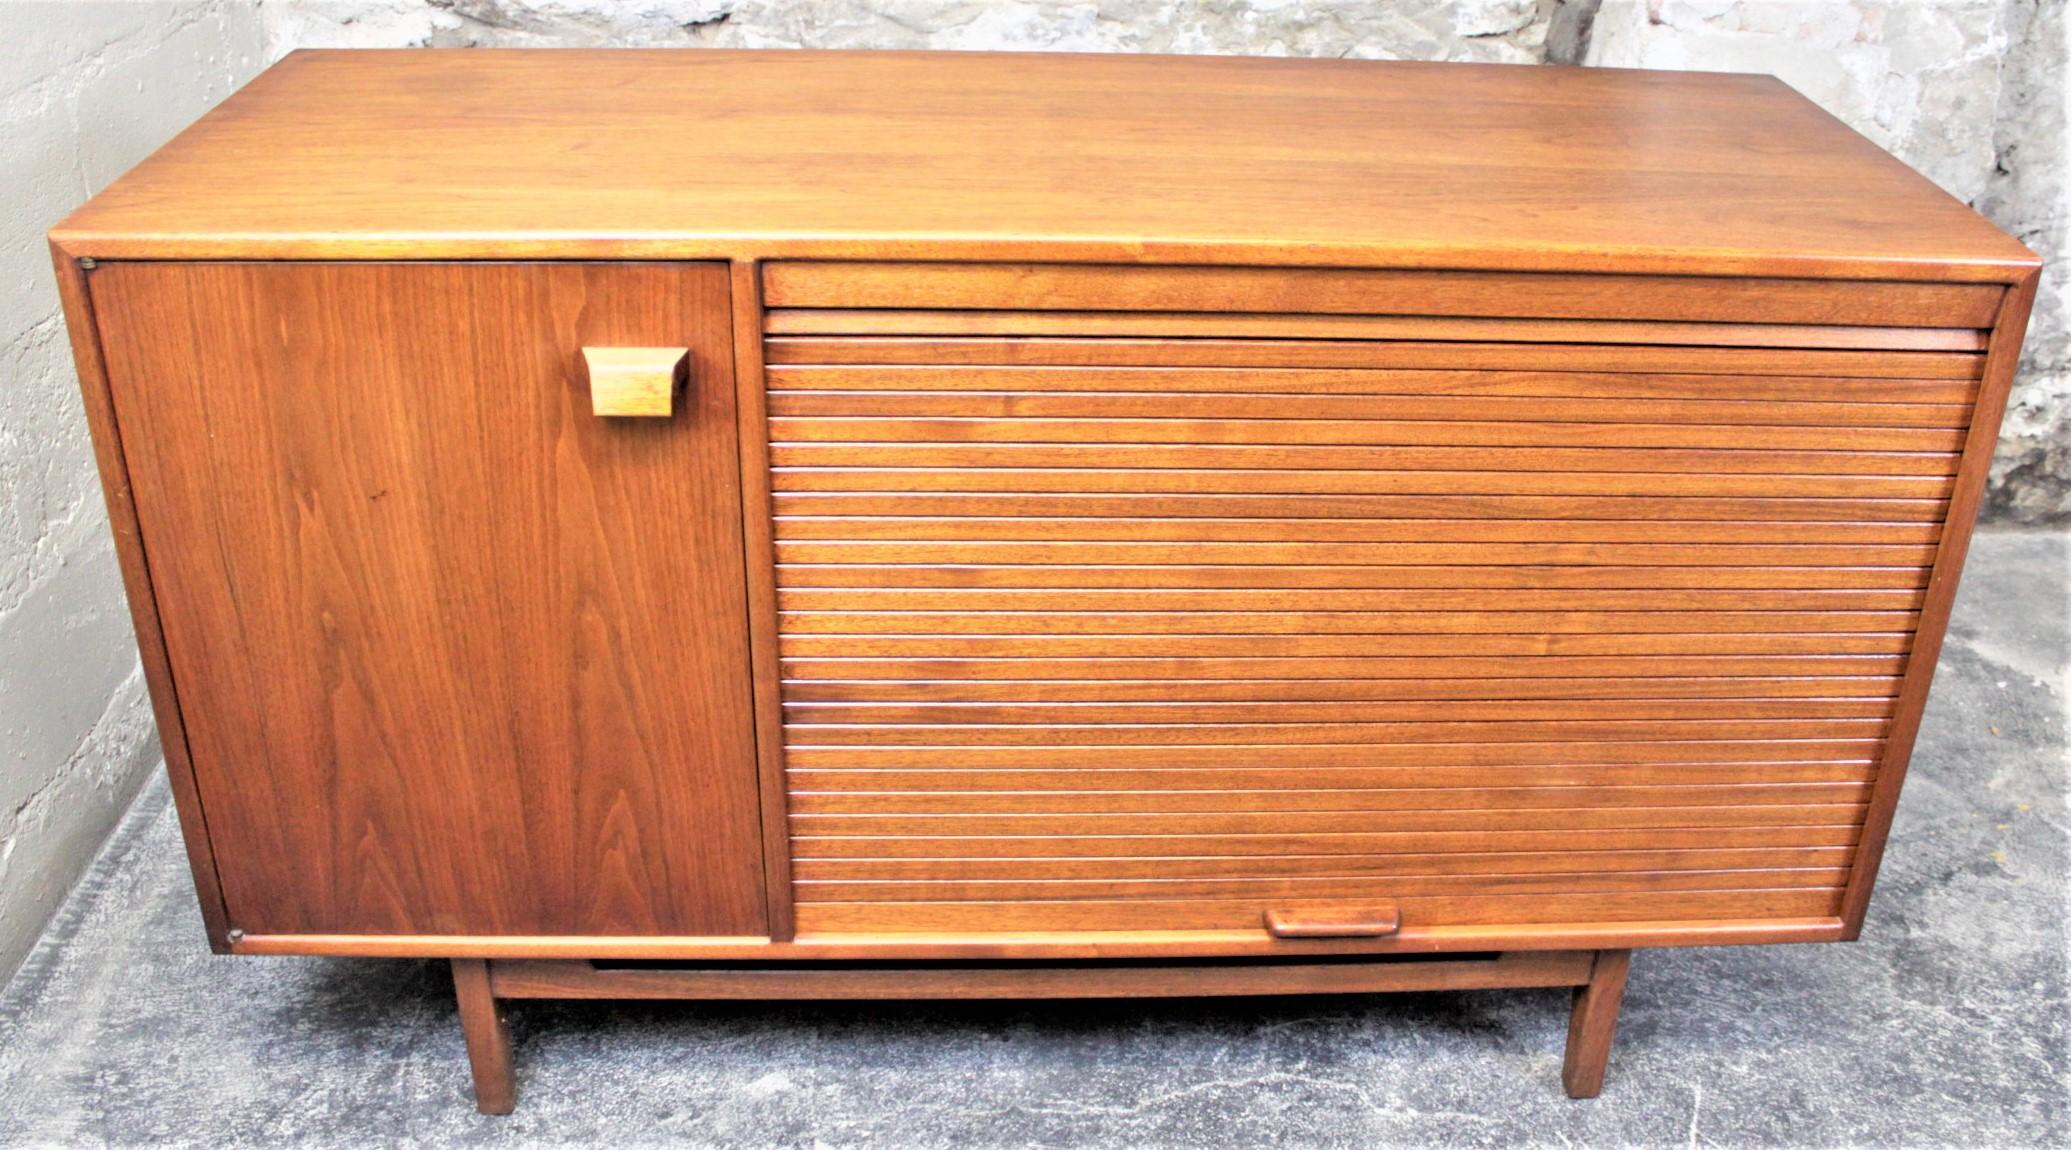 Hand-Crafted Jens Risom Mid-Century Modern Walnut Credenza with Tambour Door